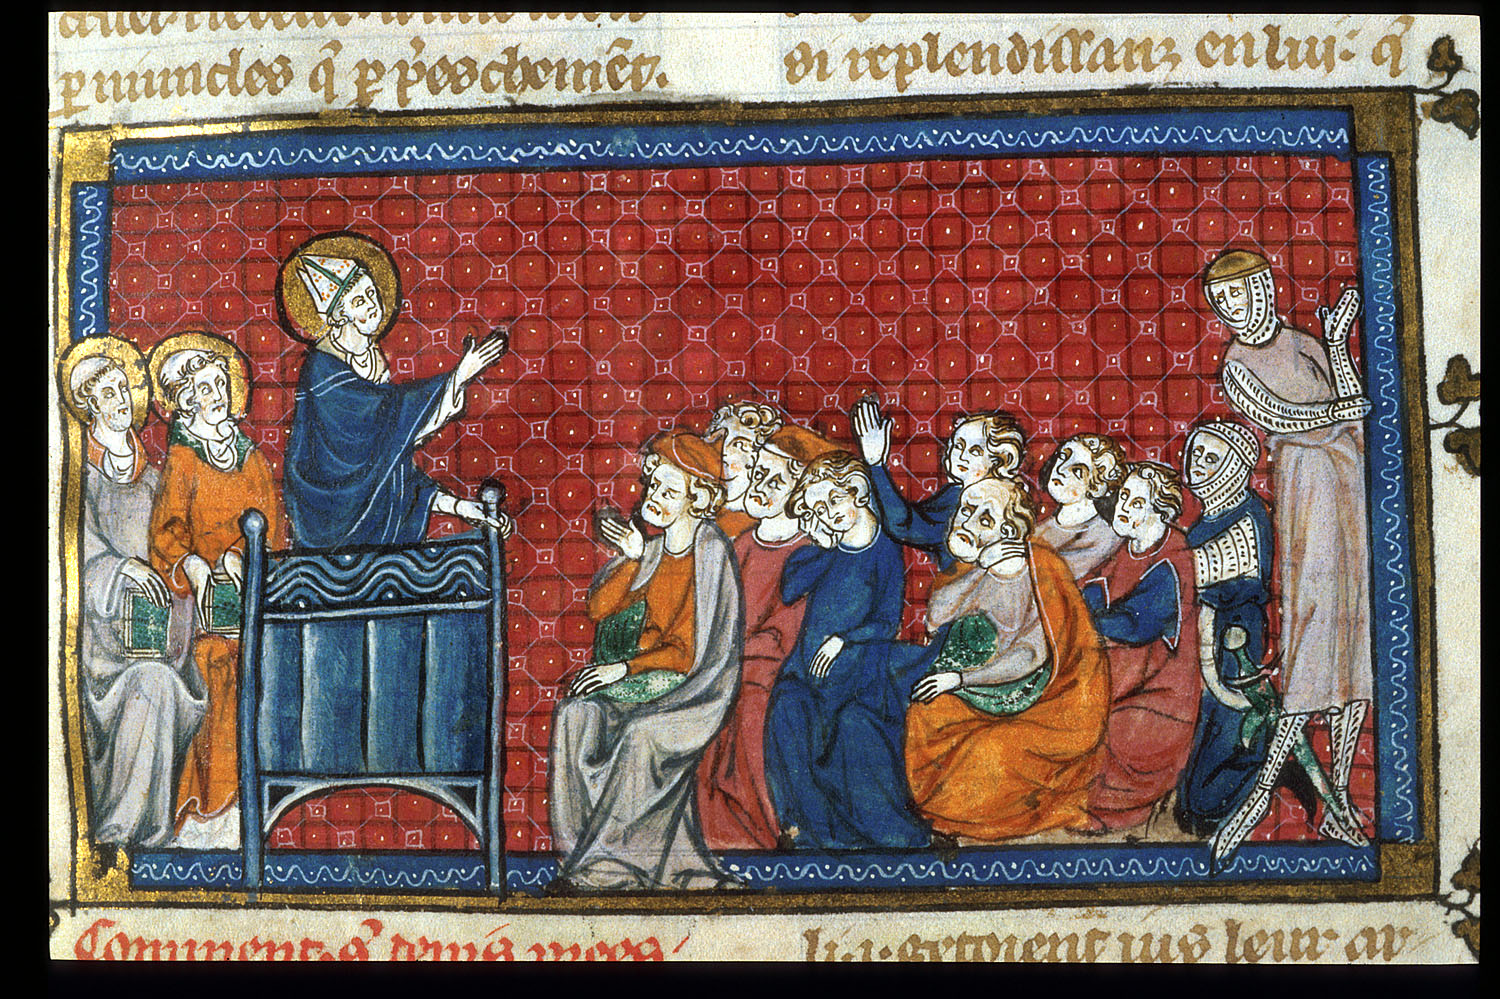 How to Win Friends and Influence People: Medieval Bishops edition -  Medievalists.net